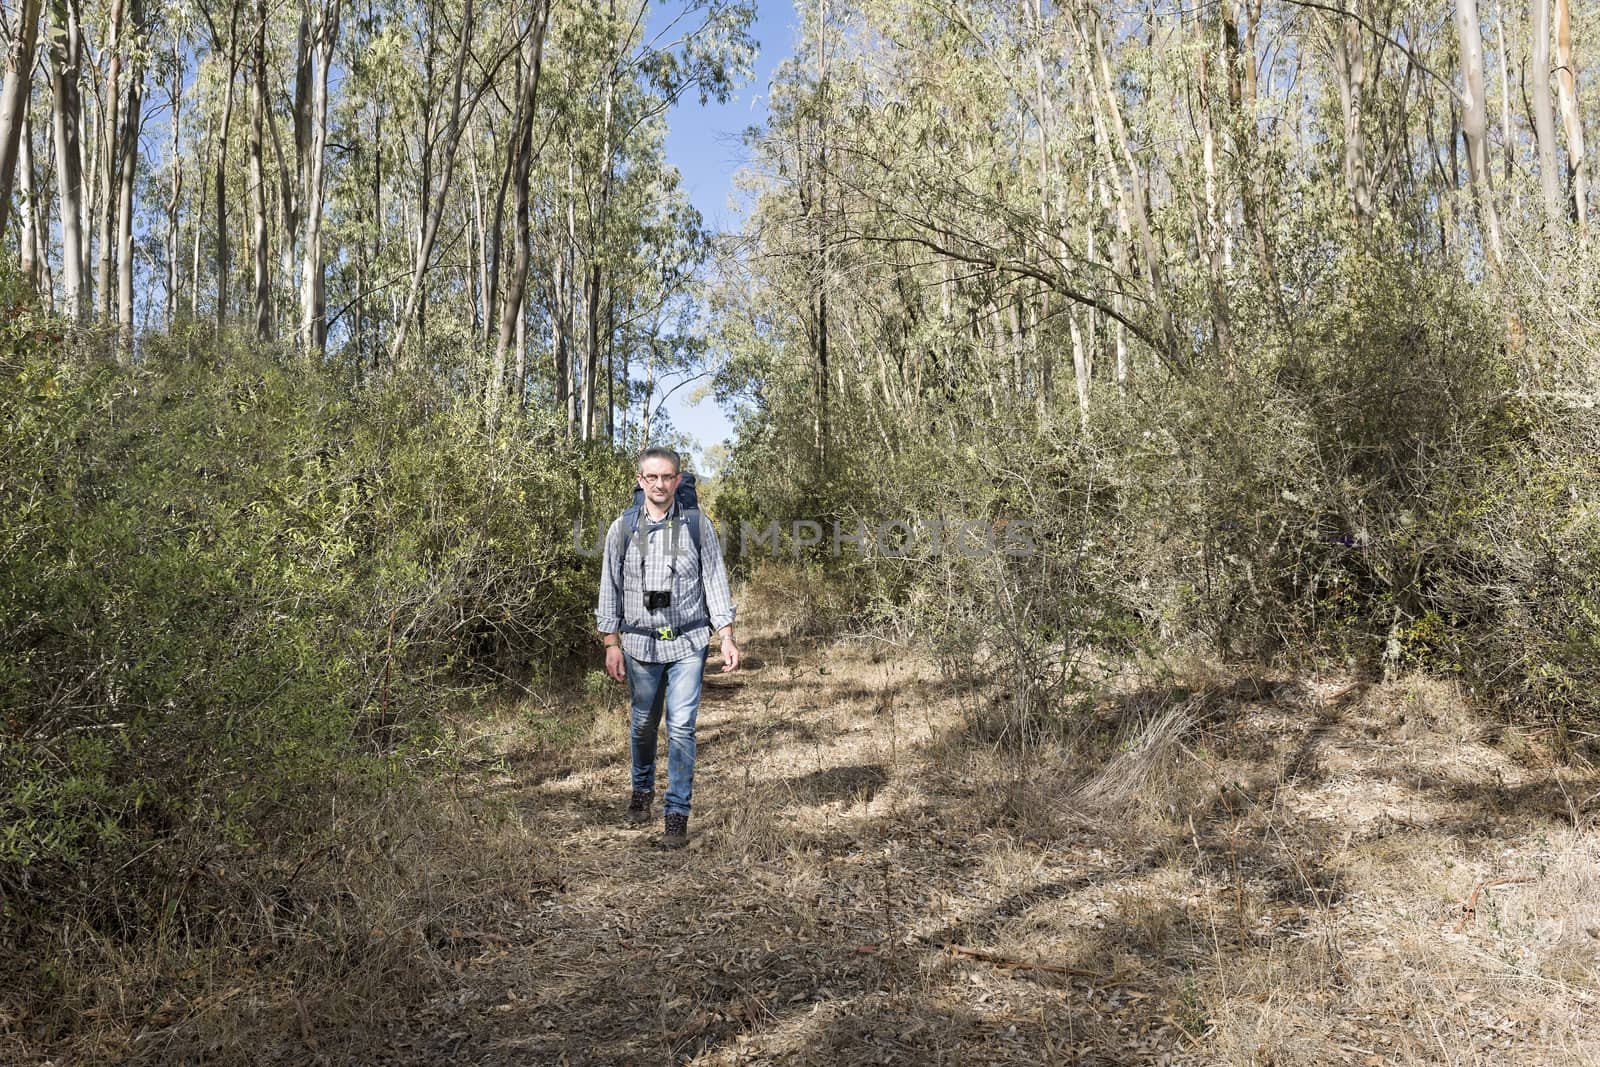 Hiker in the Sardinian Forest of eucalyptus with mirrorless camera